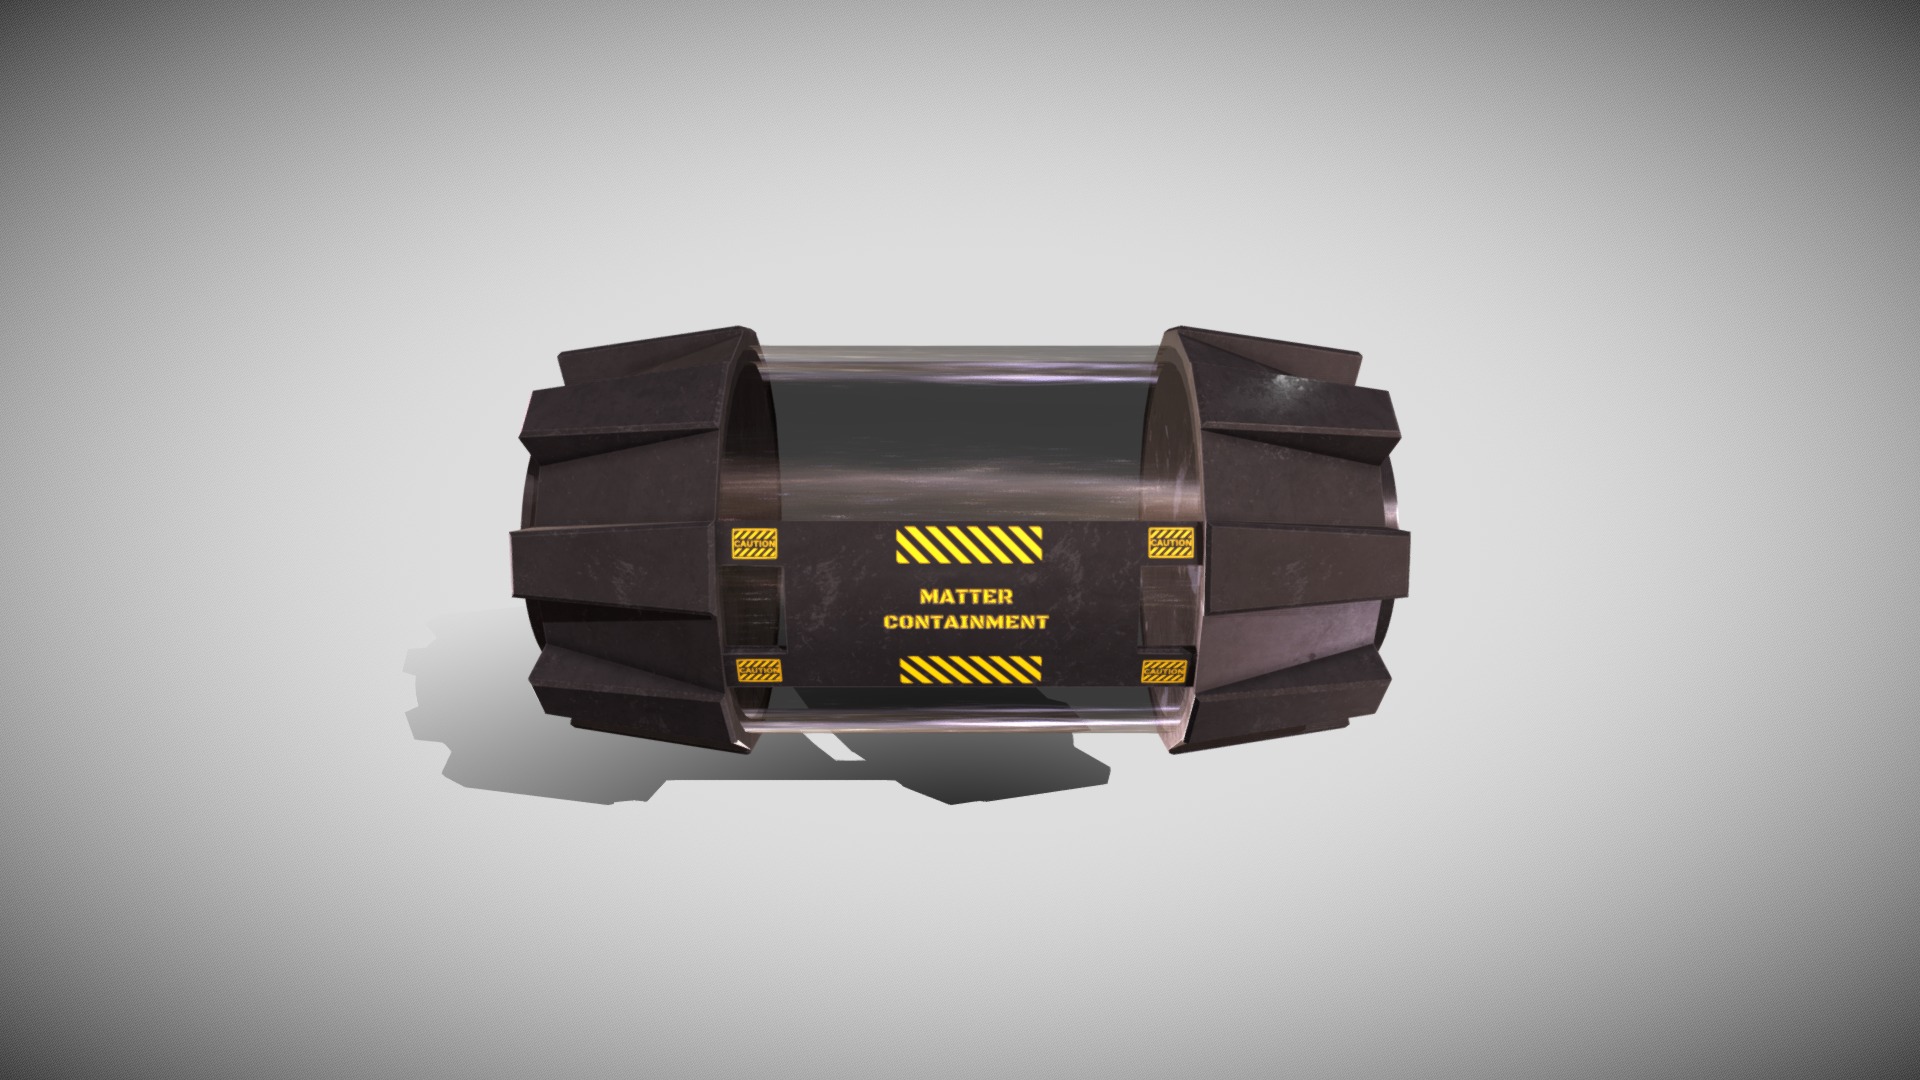 3D model Anti-matter Container - This is a 3D model of the Anti-matter Container. The 3D model is about a black rectangular object with yellow text.